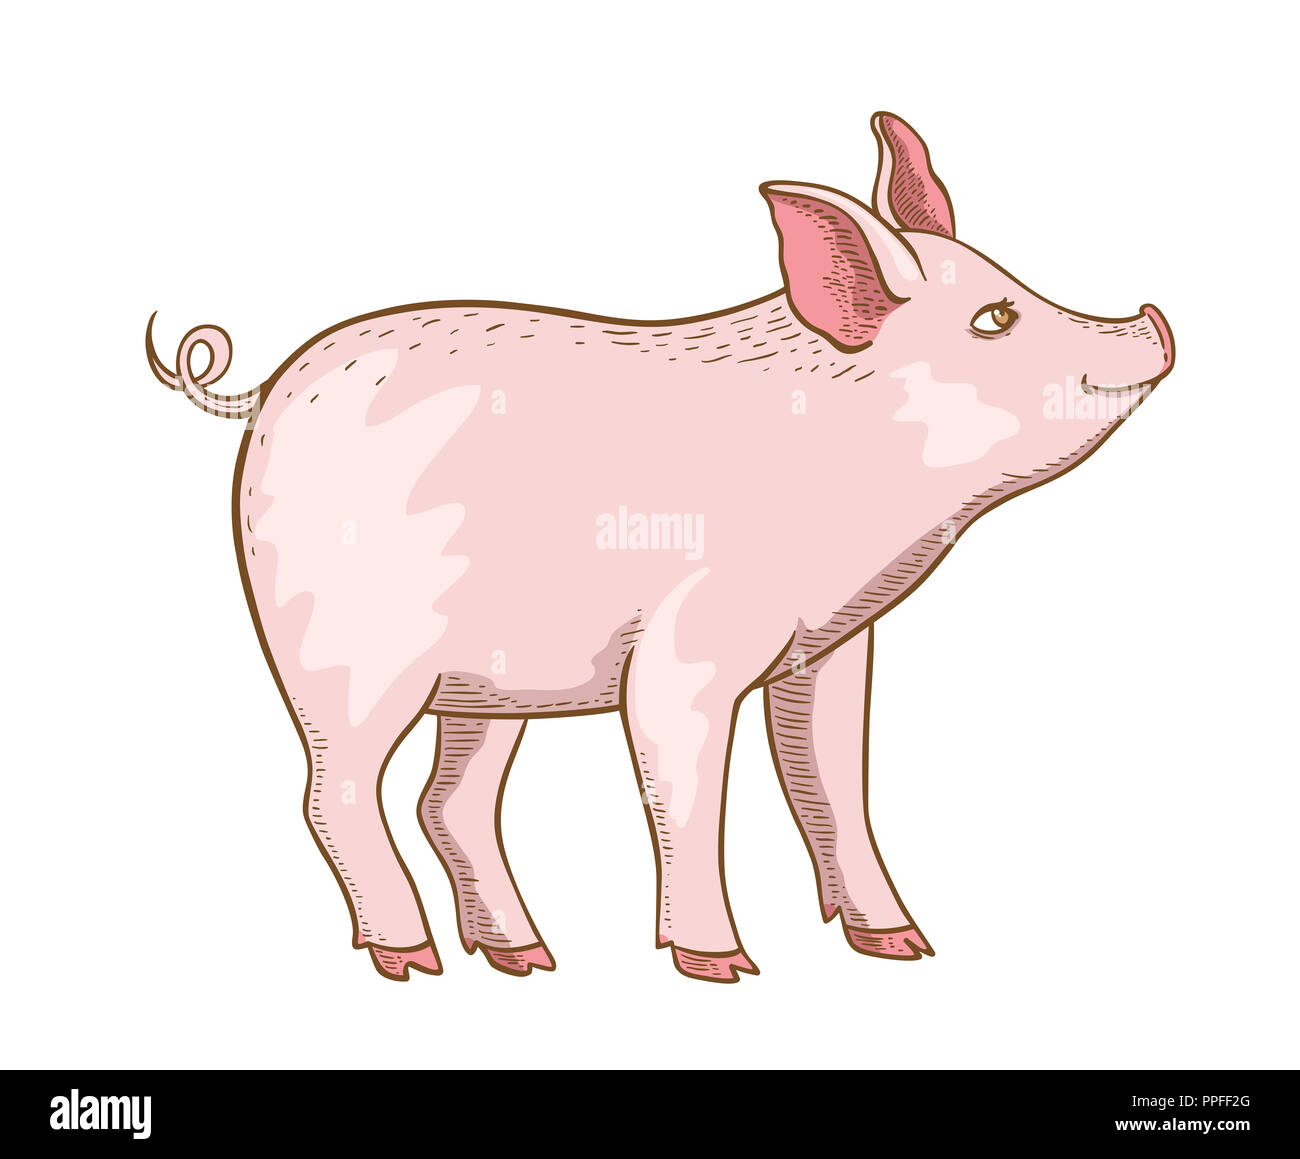 Cute pink little pig on a white background. Hand drawn illustration Stock Photo